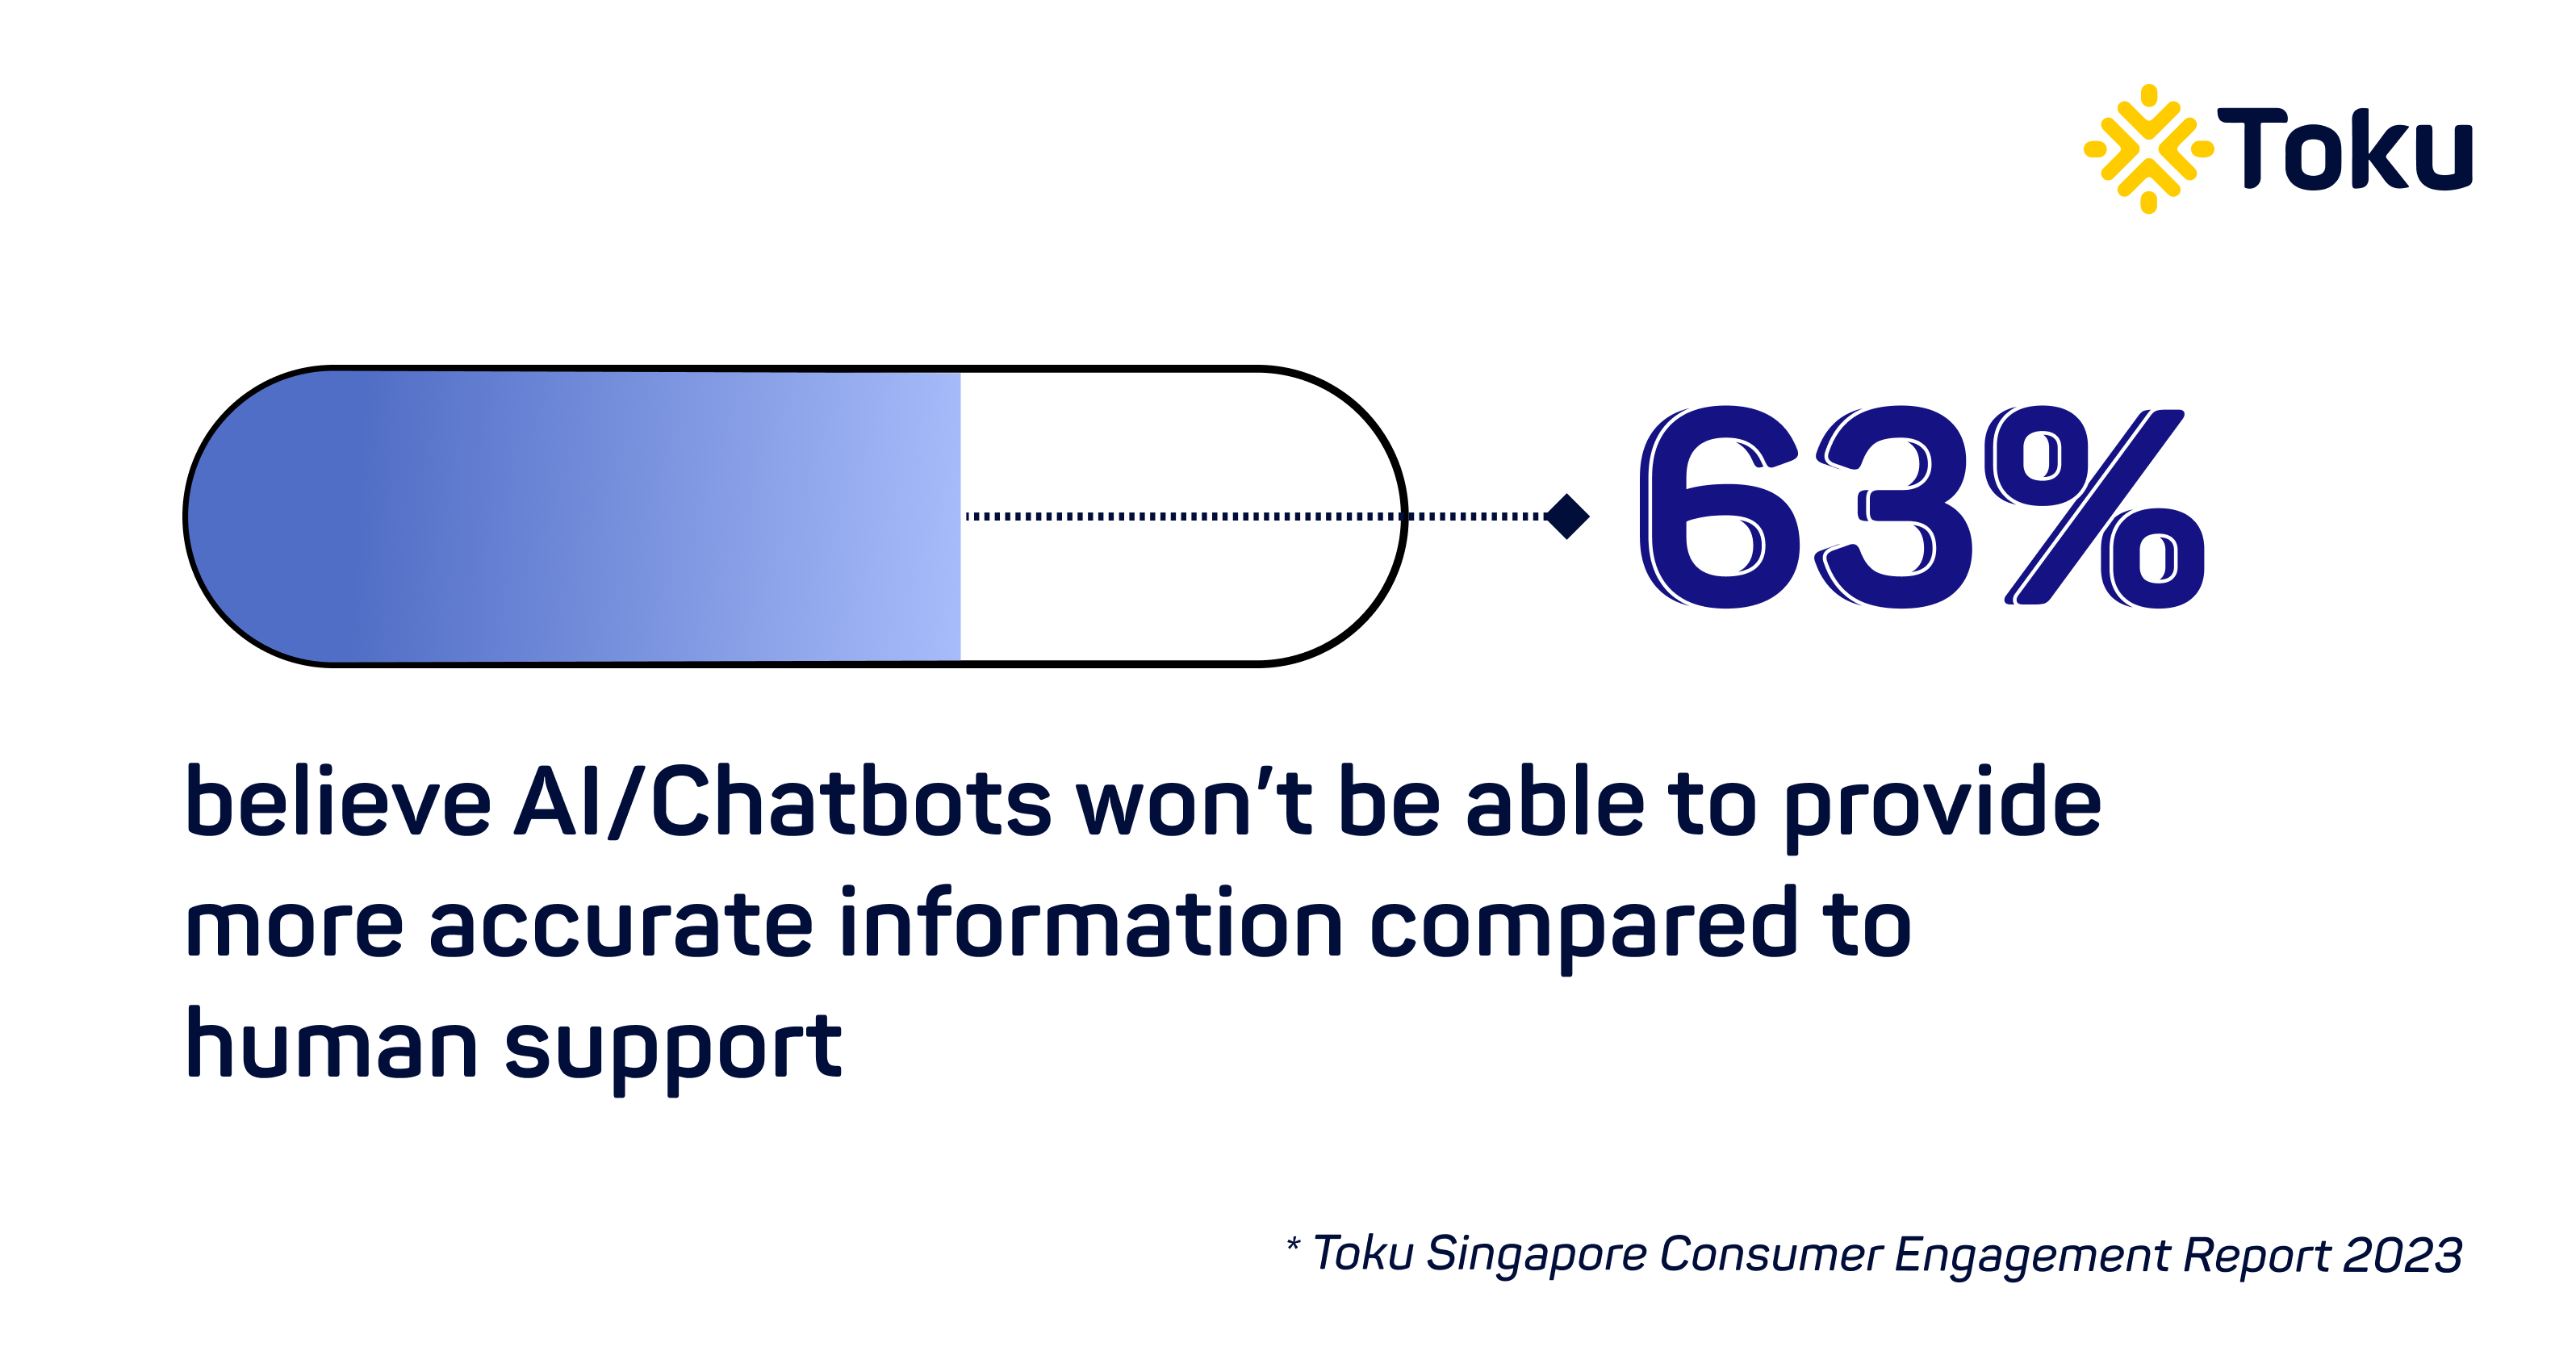 63 percent believe AI or chatbots unable to provide more accurate info than human support